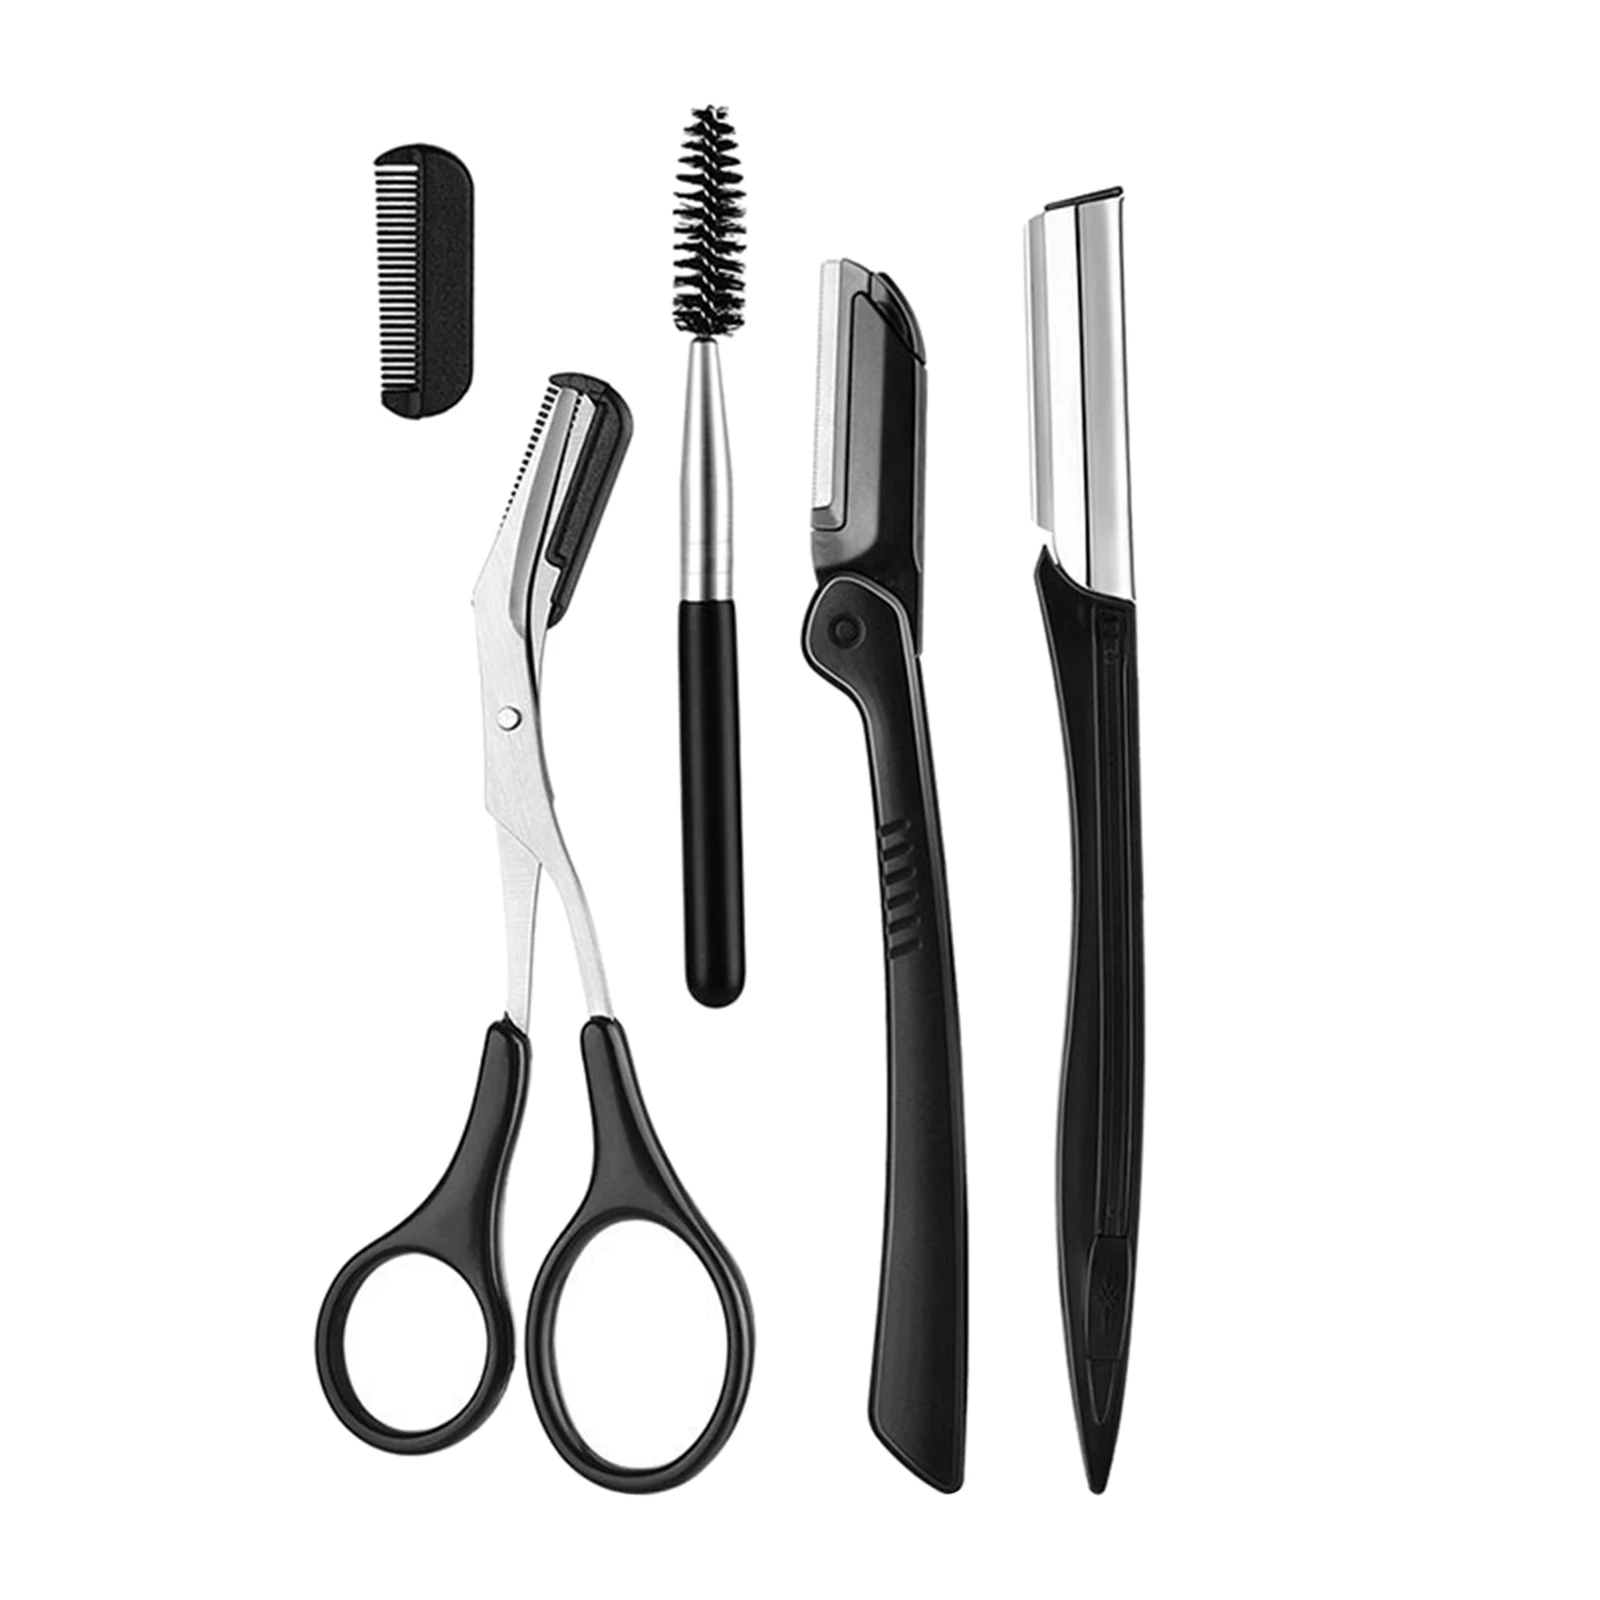 Eyebrow Kit 11 in1 Pro Eyebrow Grooming Kit with Eyebrow Scissors Eyebrow Razor Trimmer Brush and Comb for Women Eyebrow Trimmer